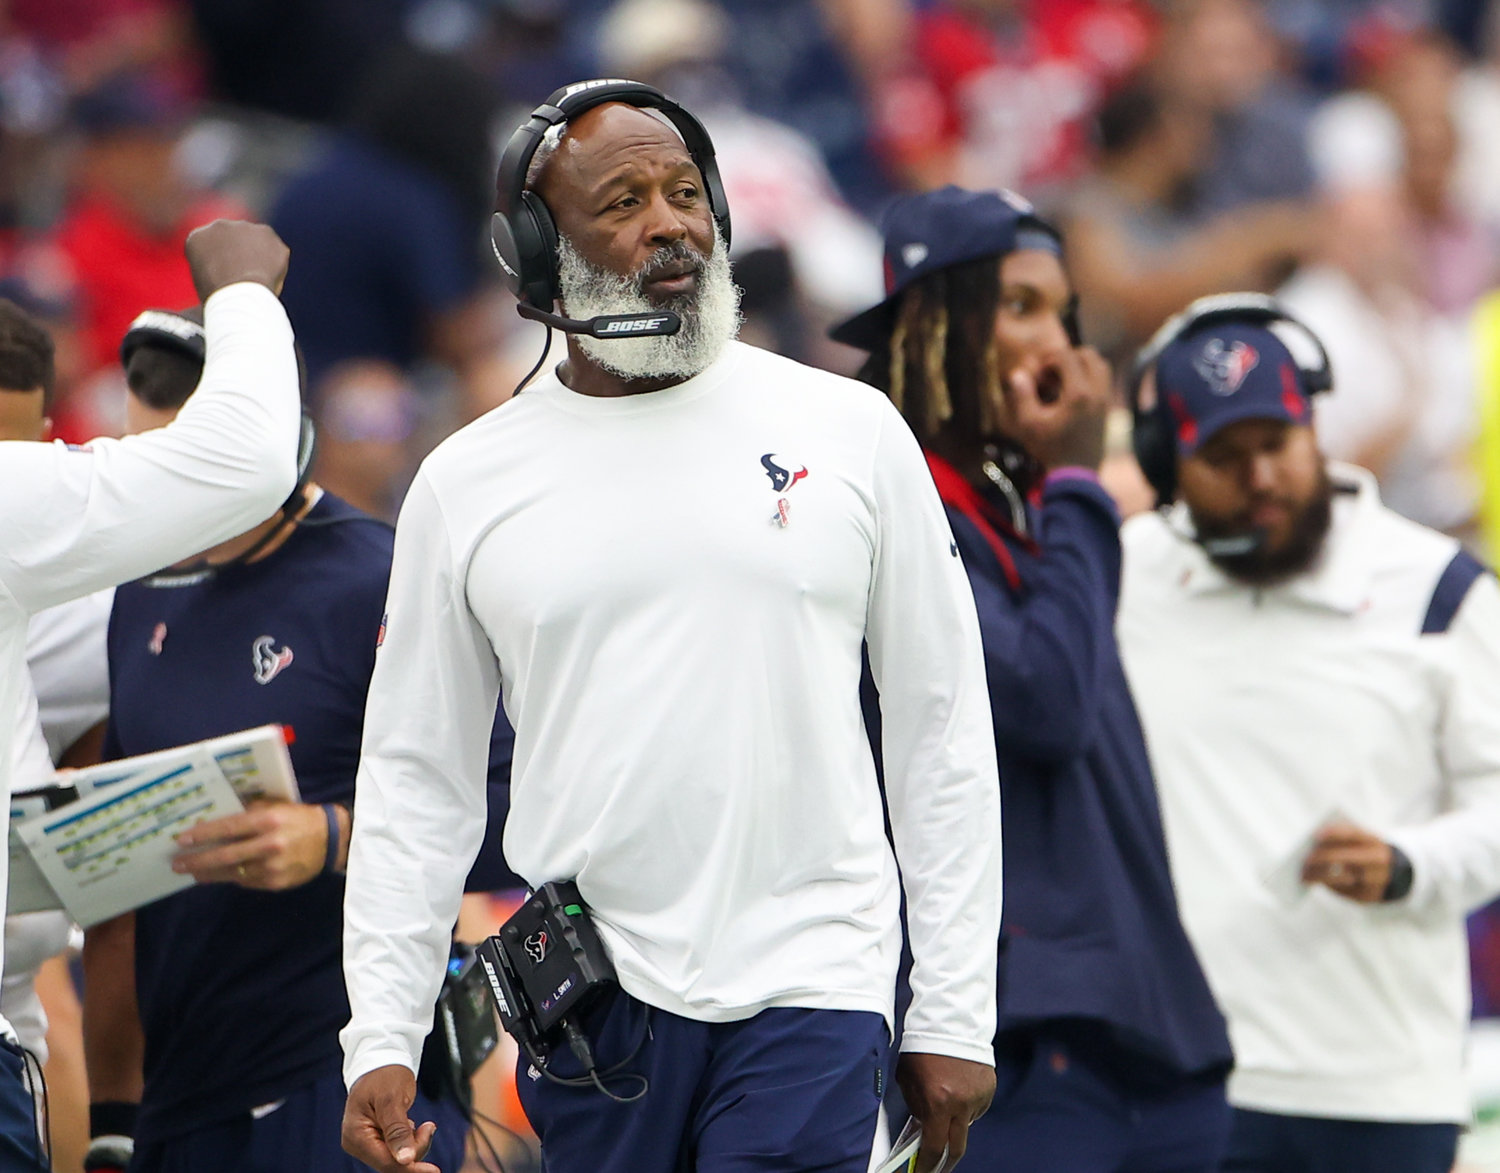 Houston Texans associate head coach Lovie Smith during the second half of an NFL game between the Houston Texans and the Jacksonville Jaguars on September 12, 2021 in Houston, Texas.